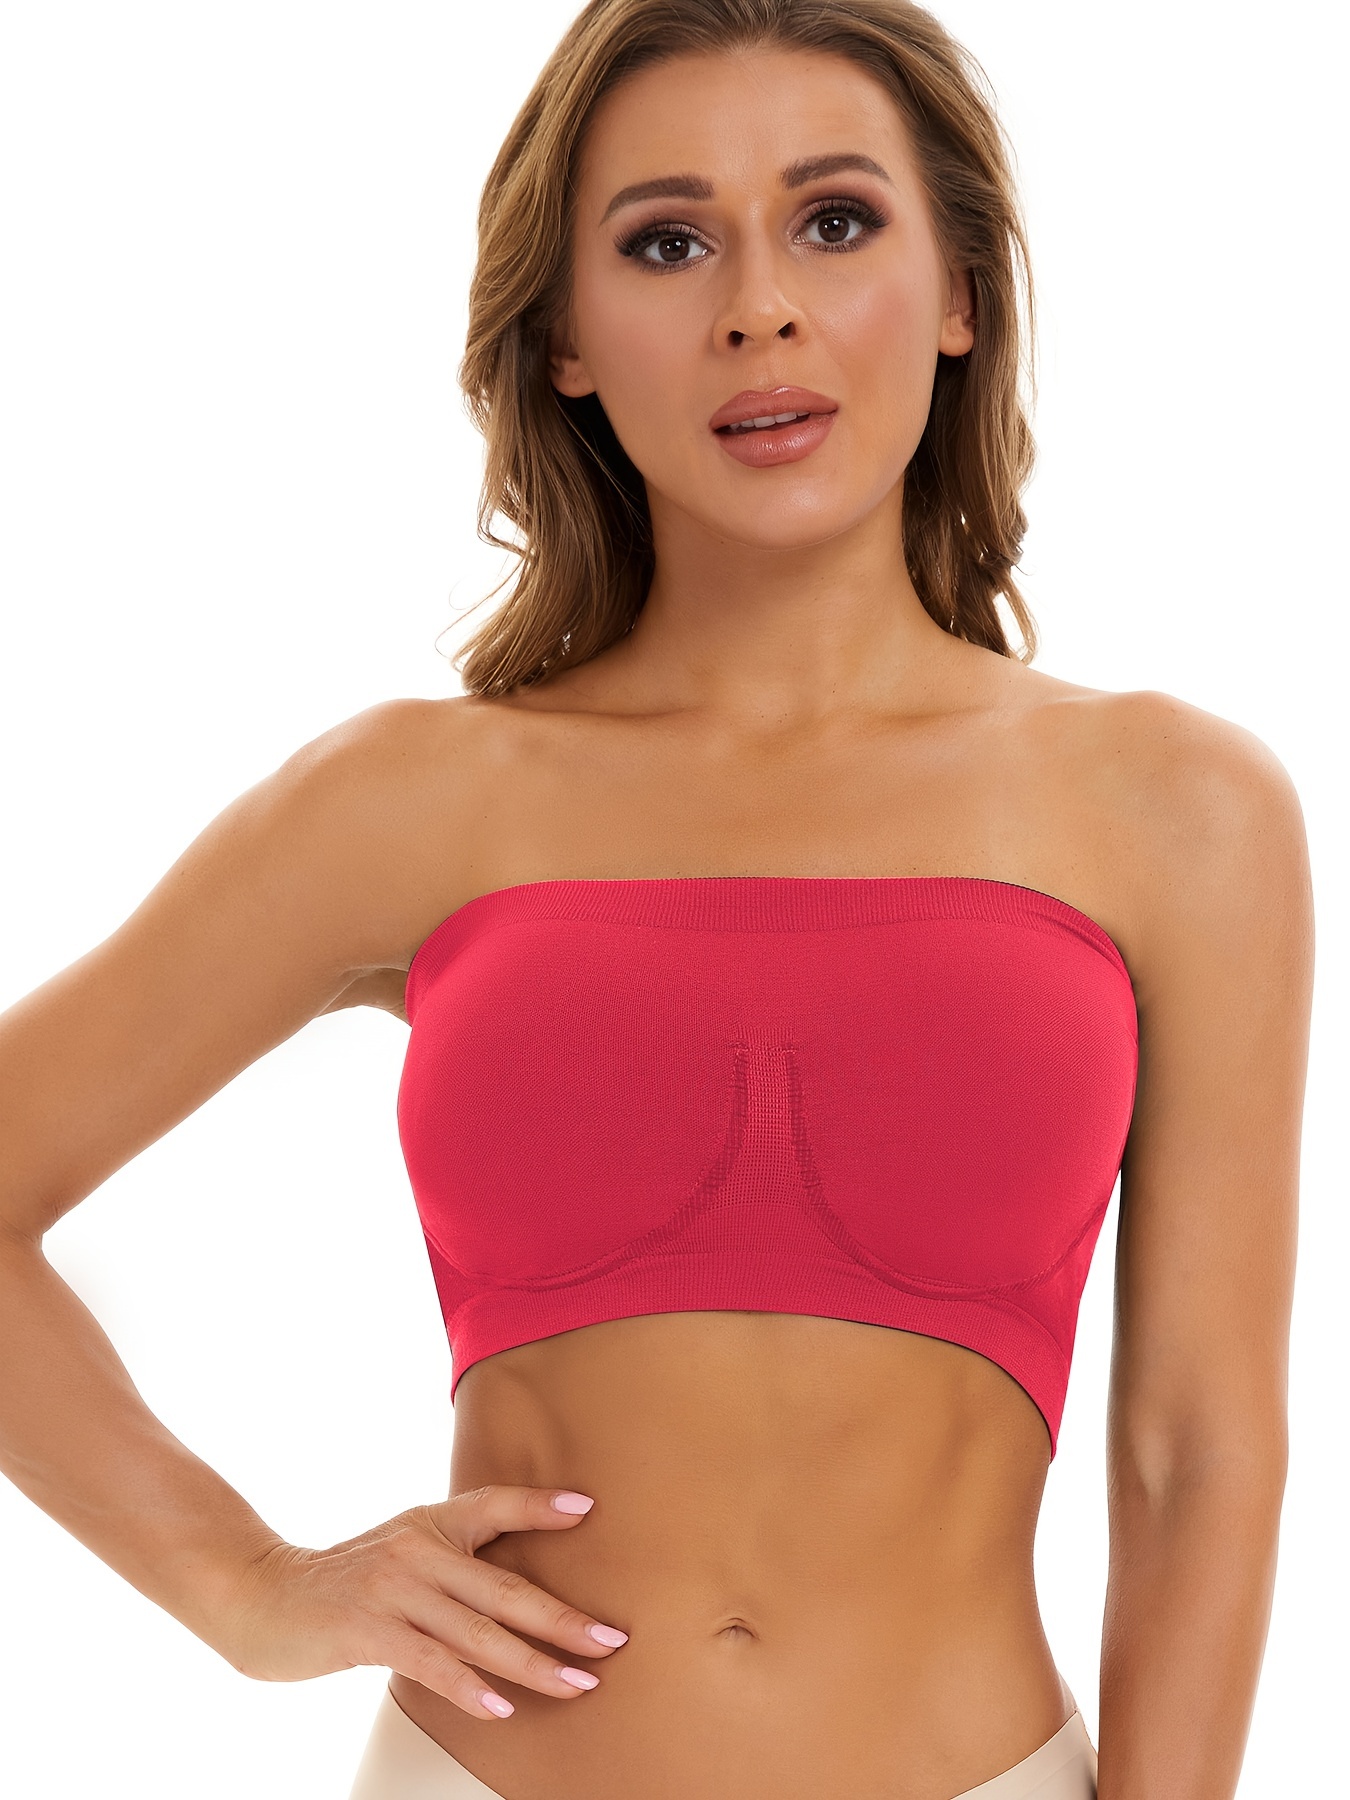 Best Deal for Cotton Tube Top Dress Bandeau Sprots Bra Strapless